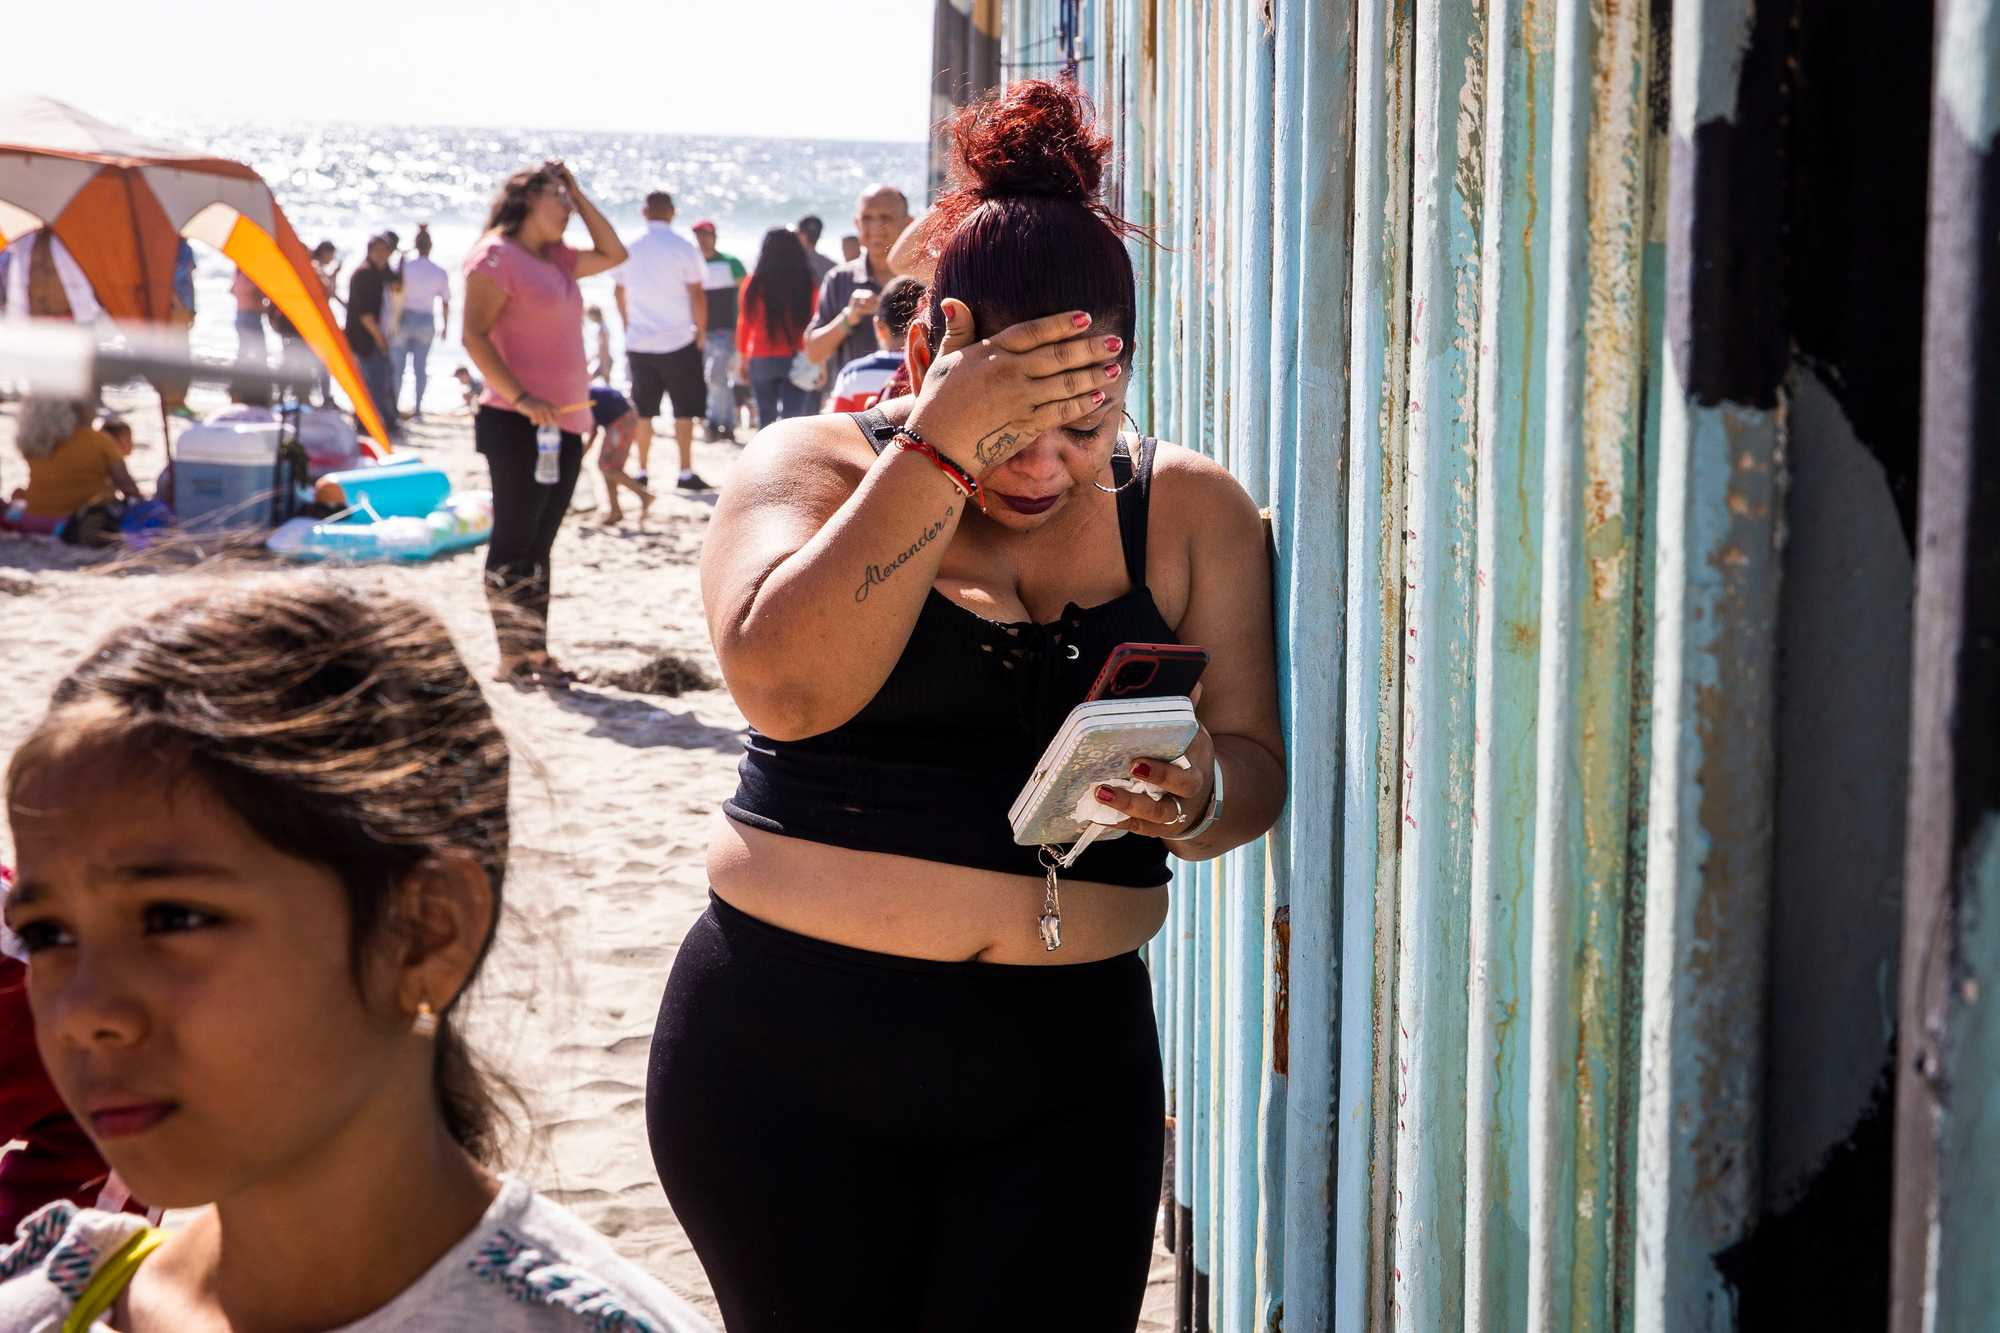 A woman cried while FaceTiming her family on the other side of the border wall. She was not aware that she would no longer be able to touch her family at the wall that separates Tijuana from San Diego. 